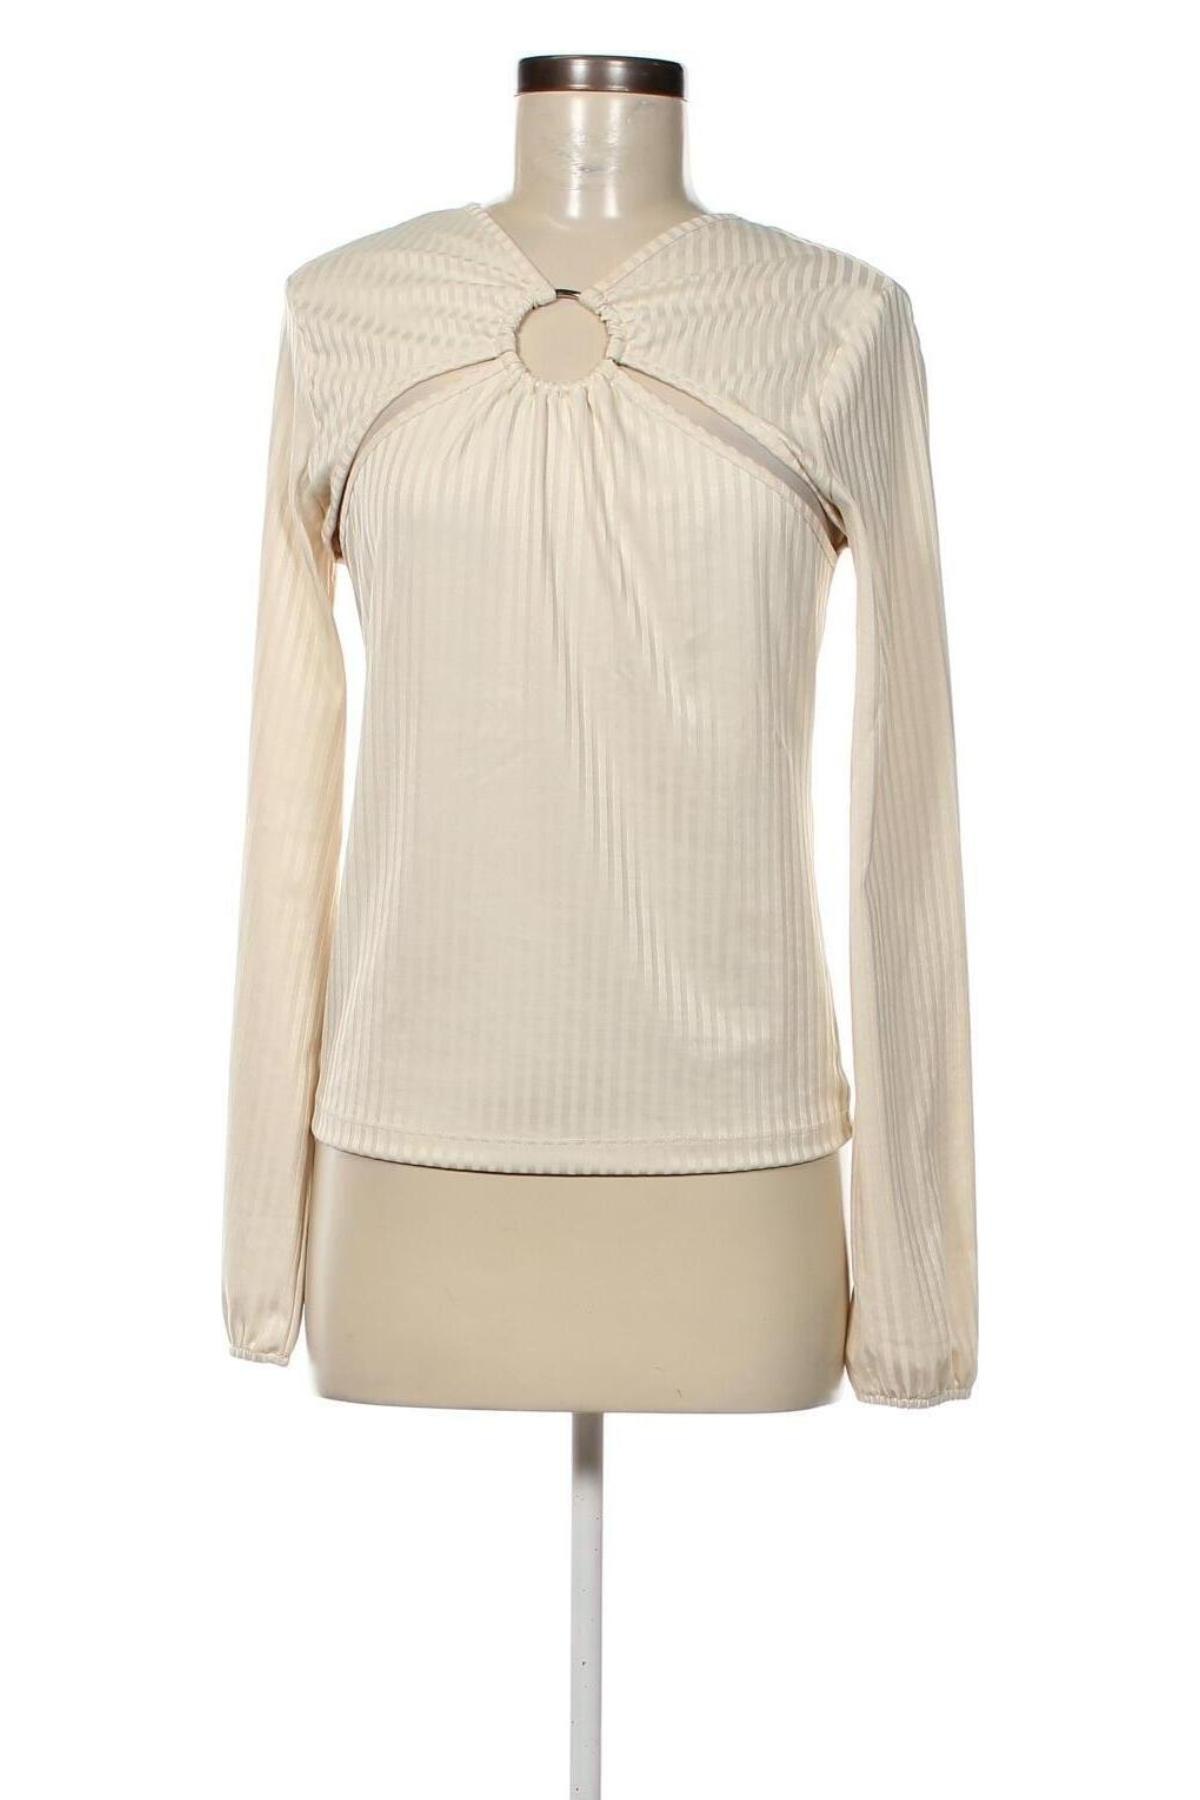 Damen Shirt Katy Perry exclusive for ABOUT YOU, Größe M, Farbe Beige, Preis € 17,86